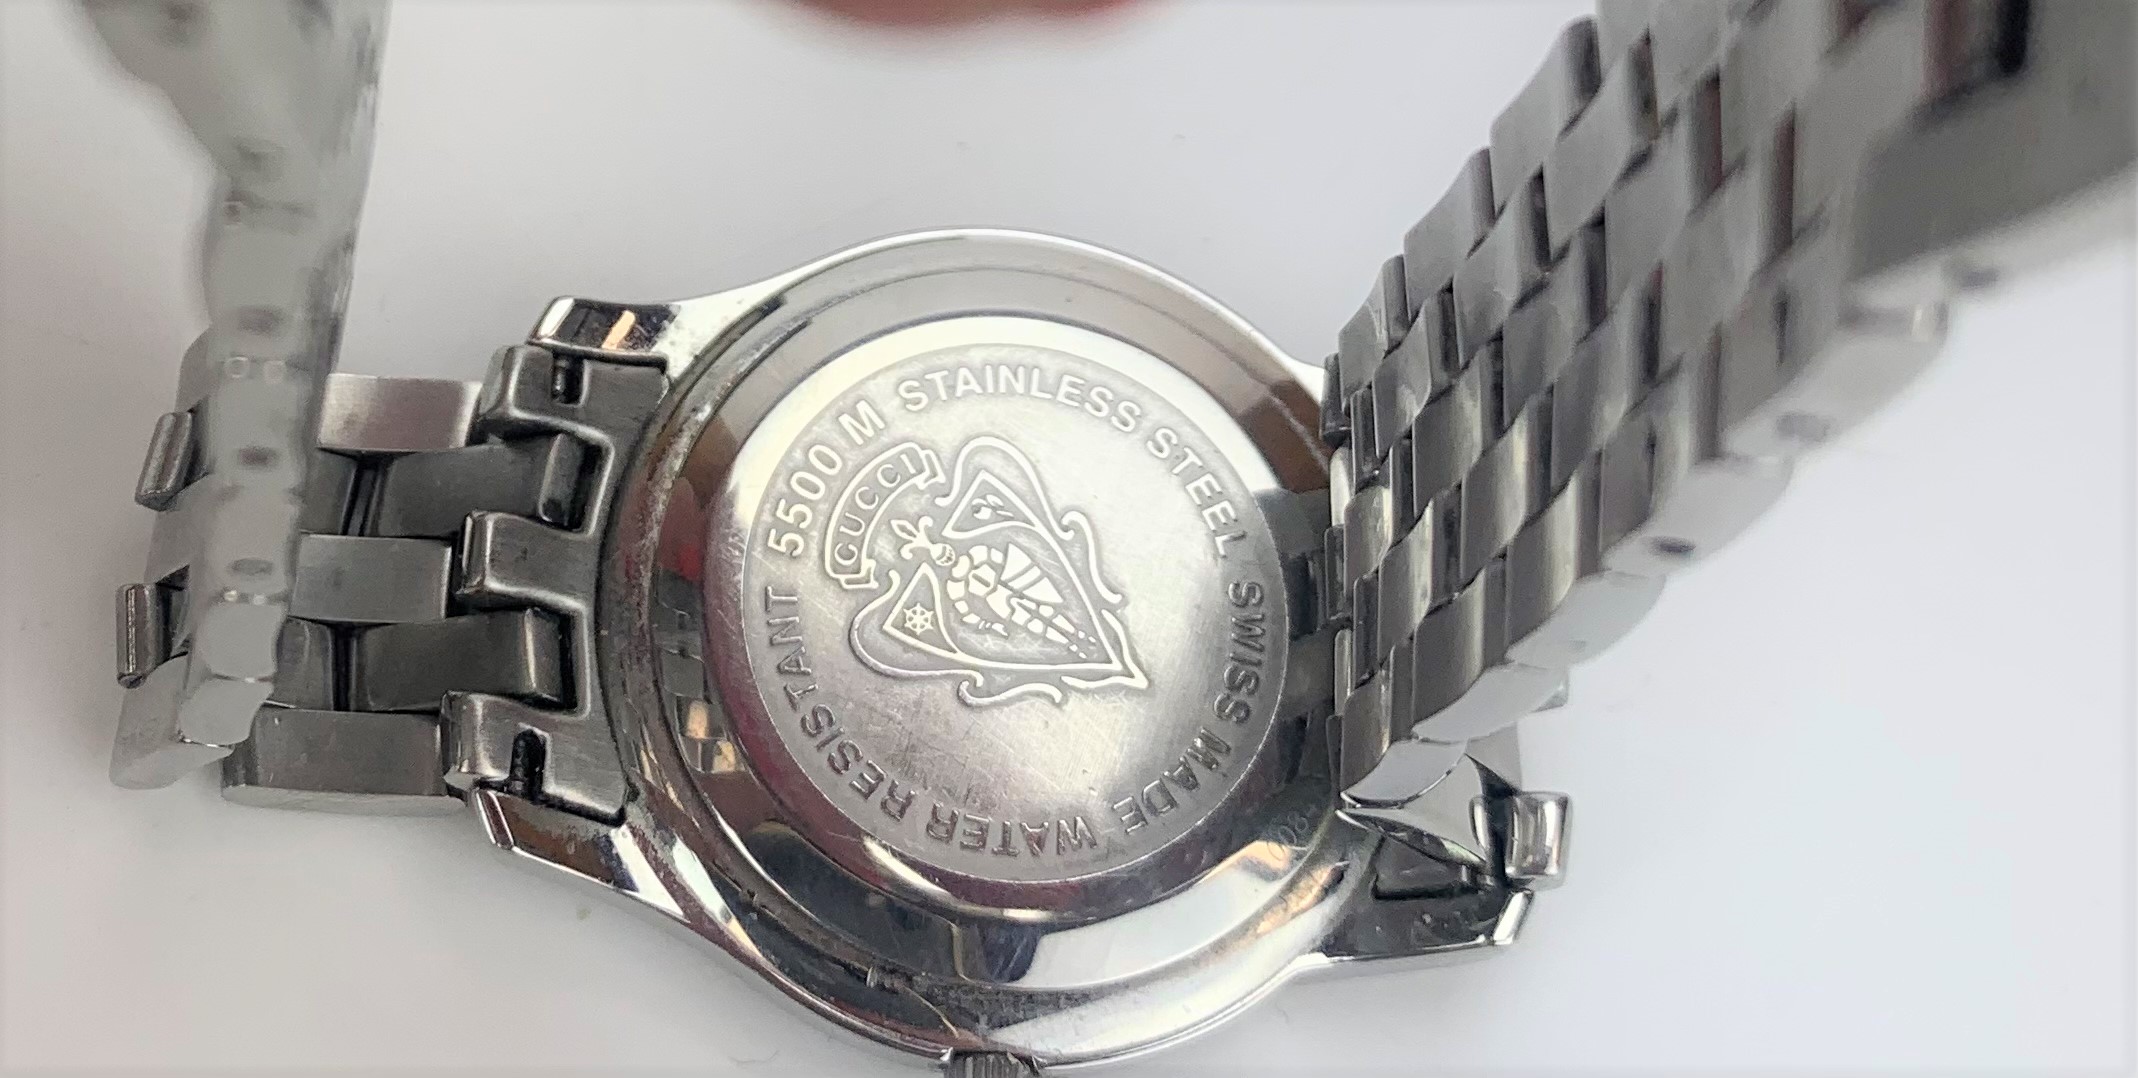 Boxed Gucci stainless steel gents watch with instructions, not running - Image 8 of 9